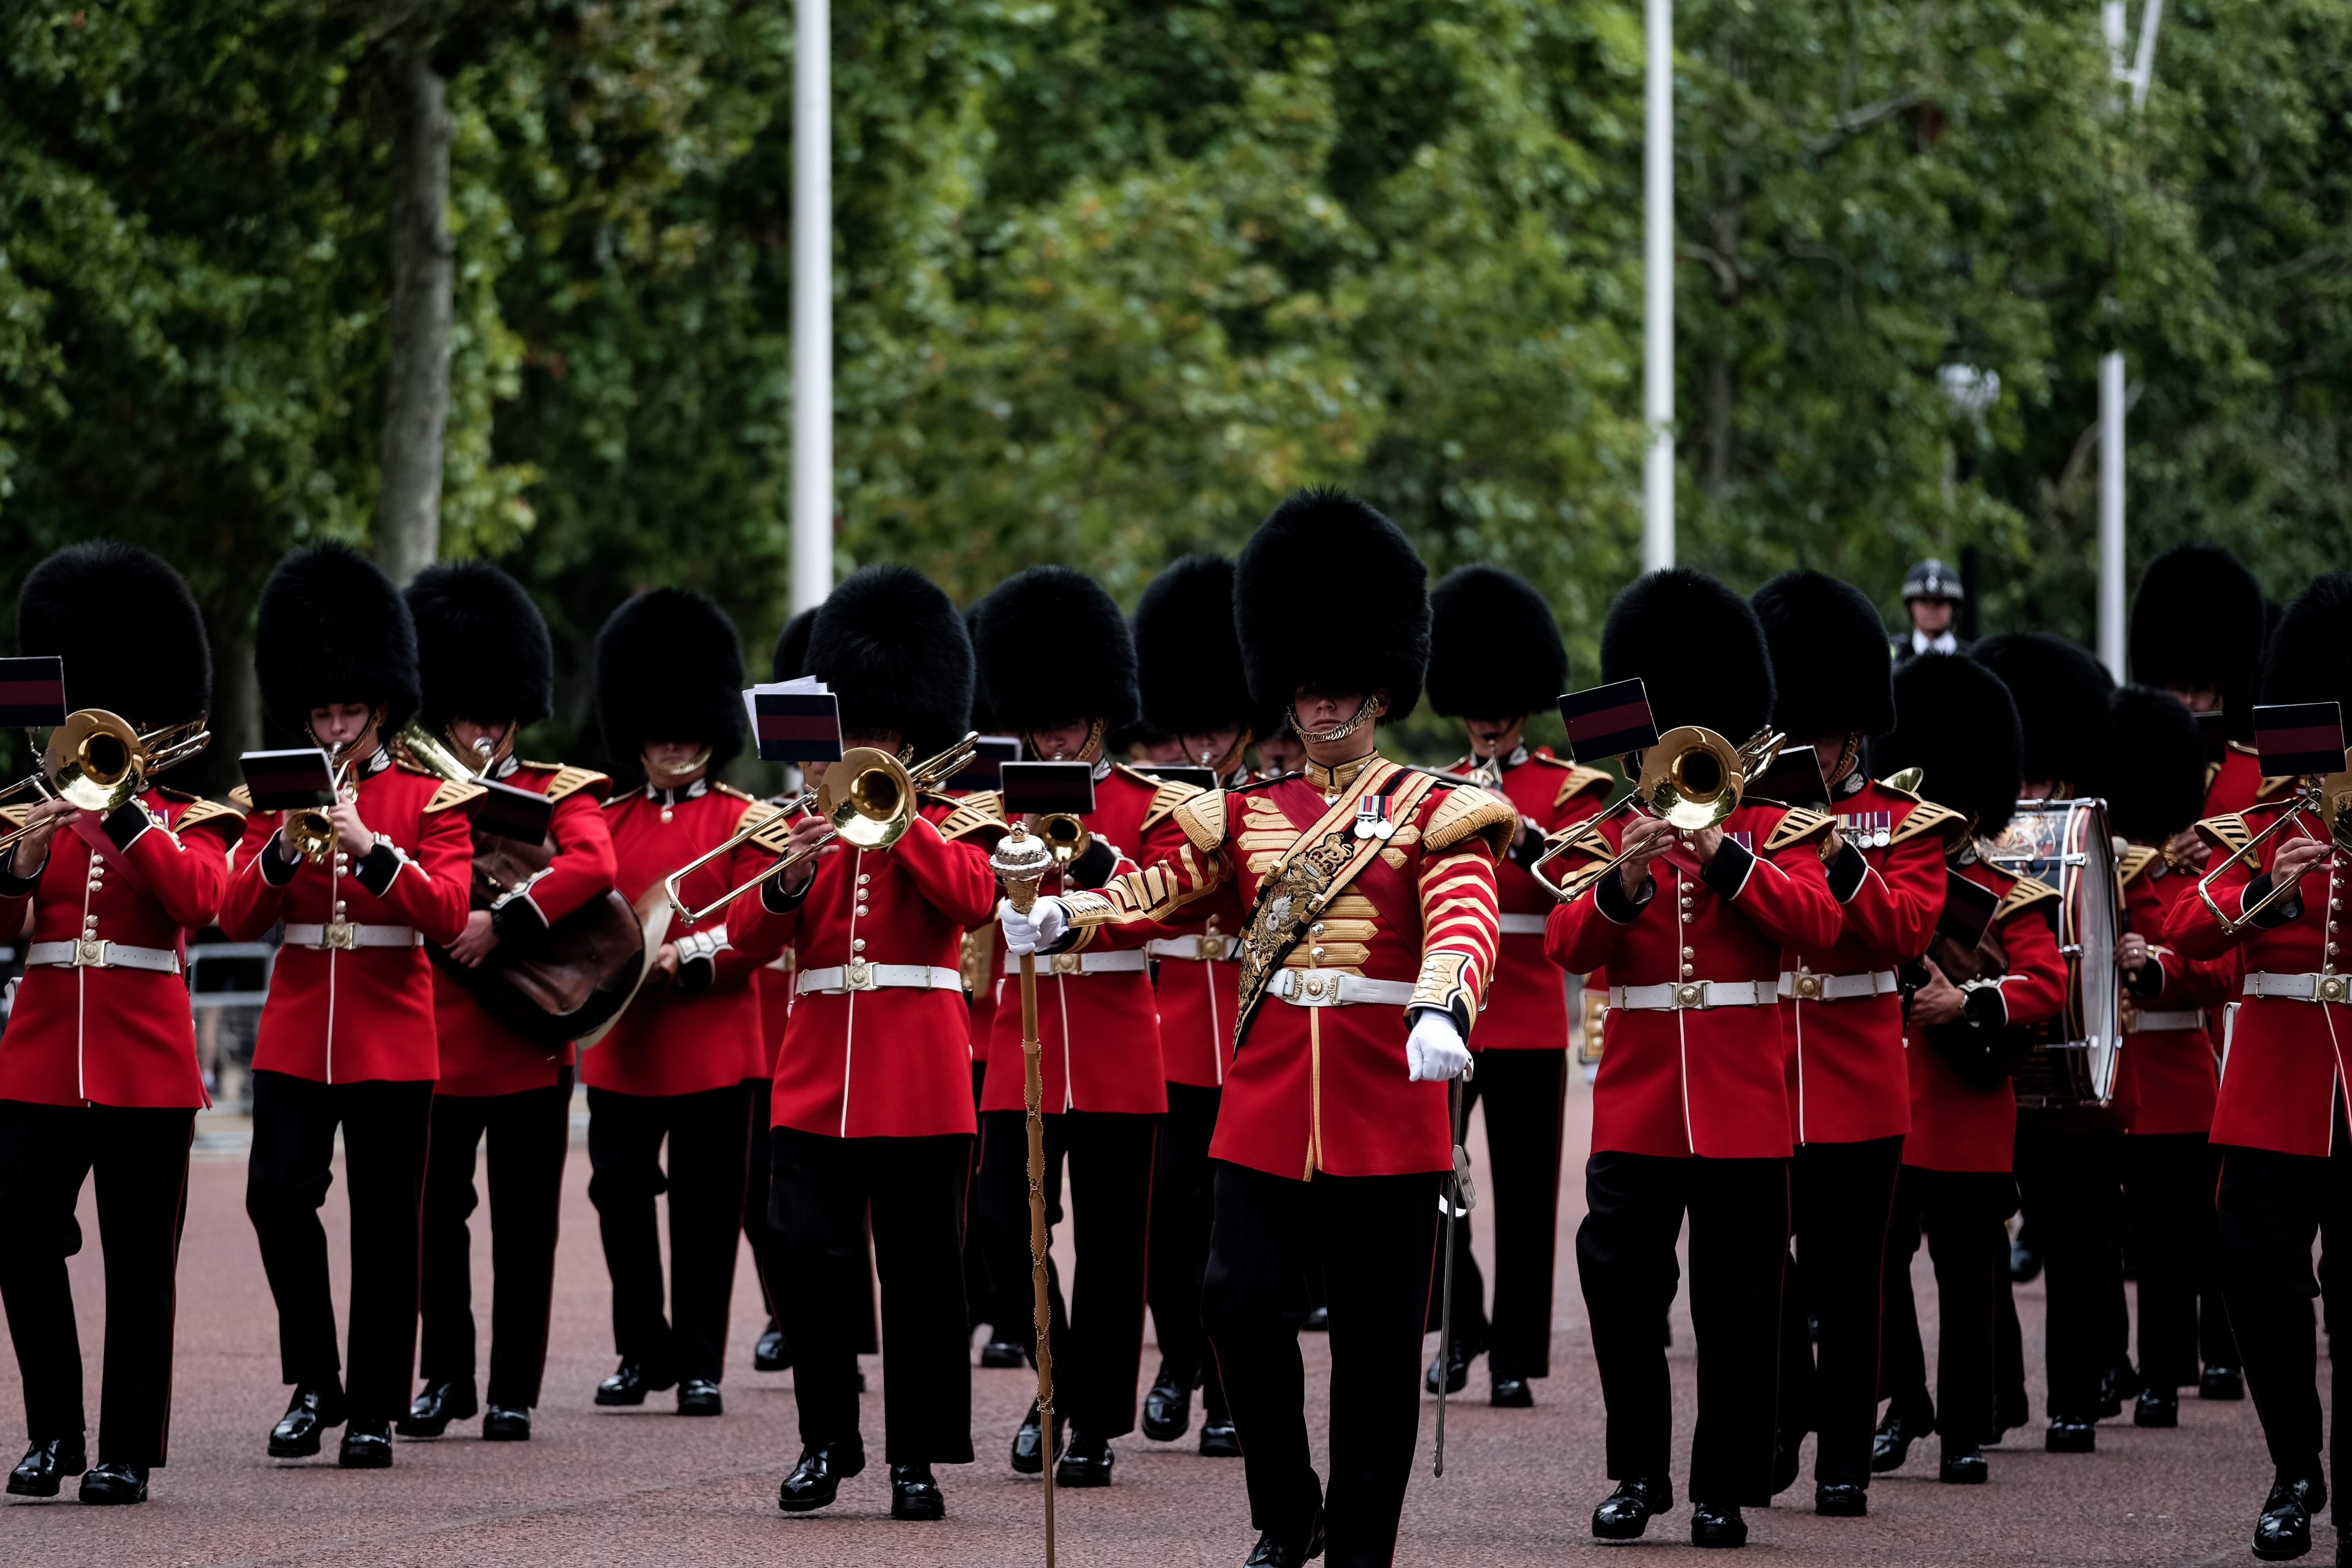 Royal guards marching towards the Buckingham Palace​ in London